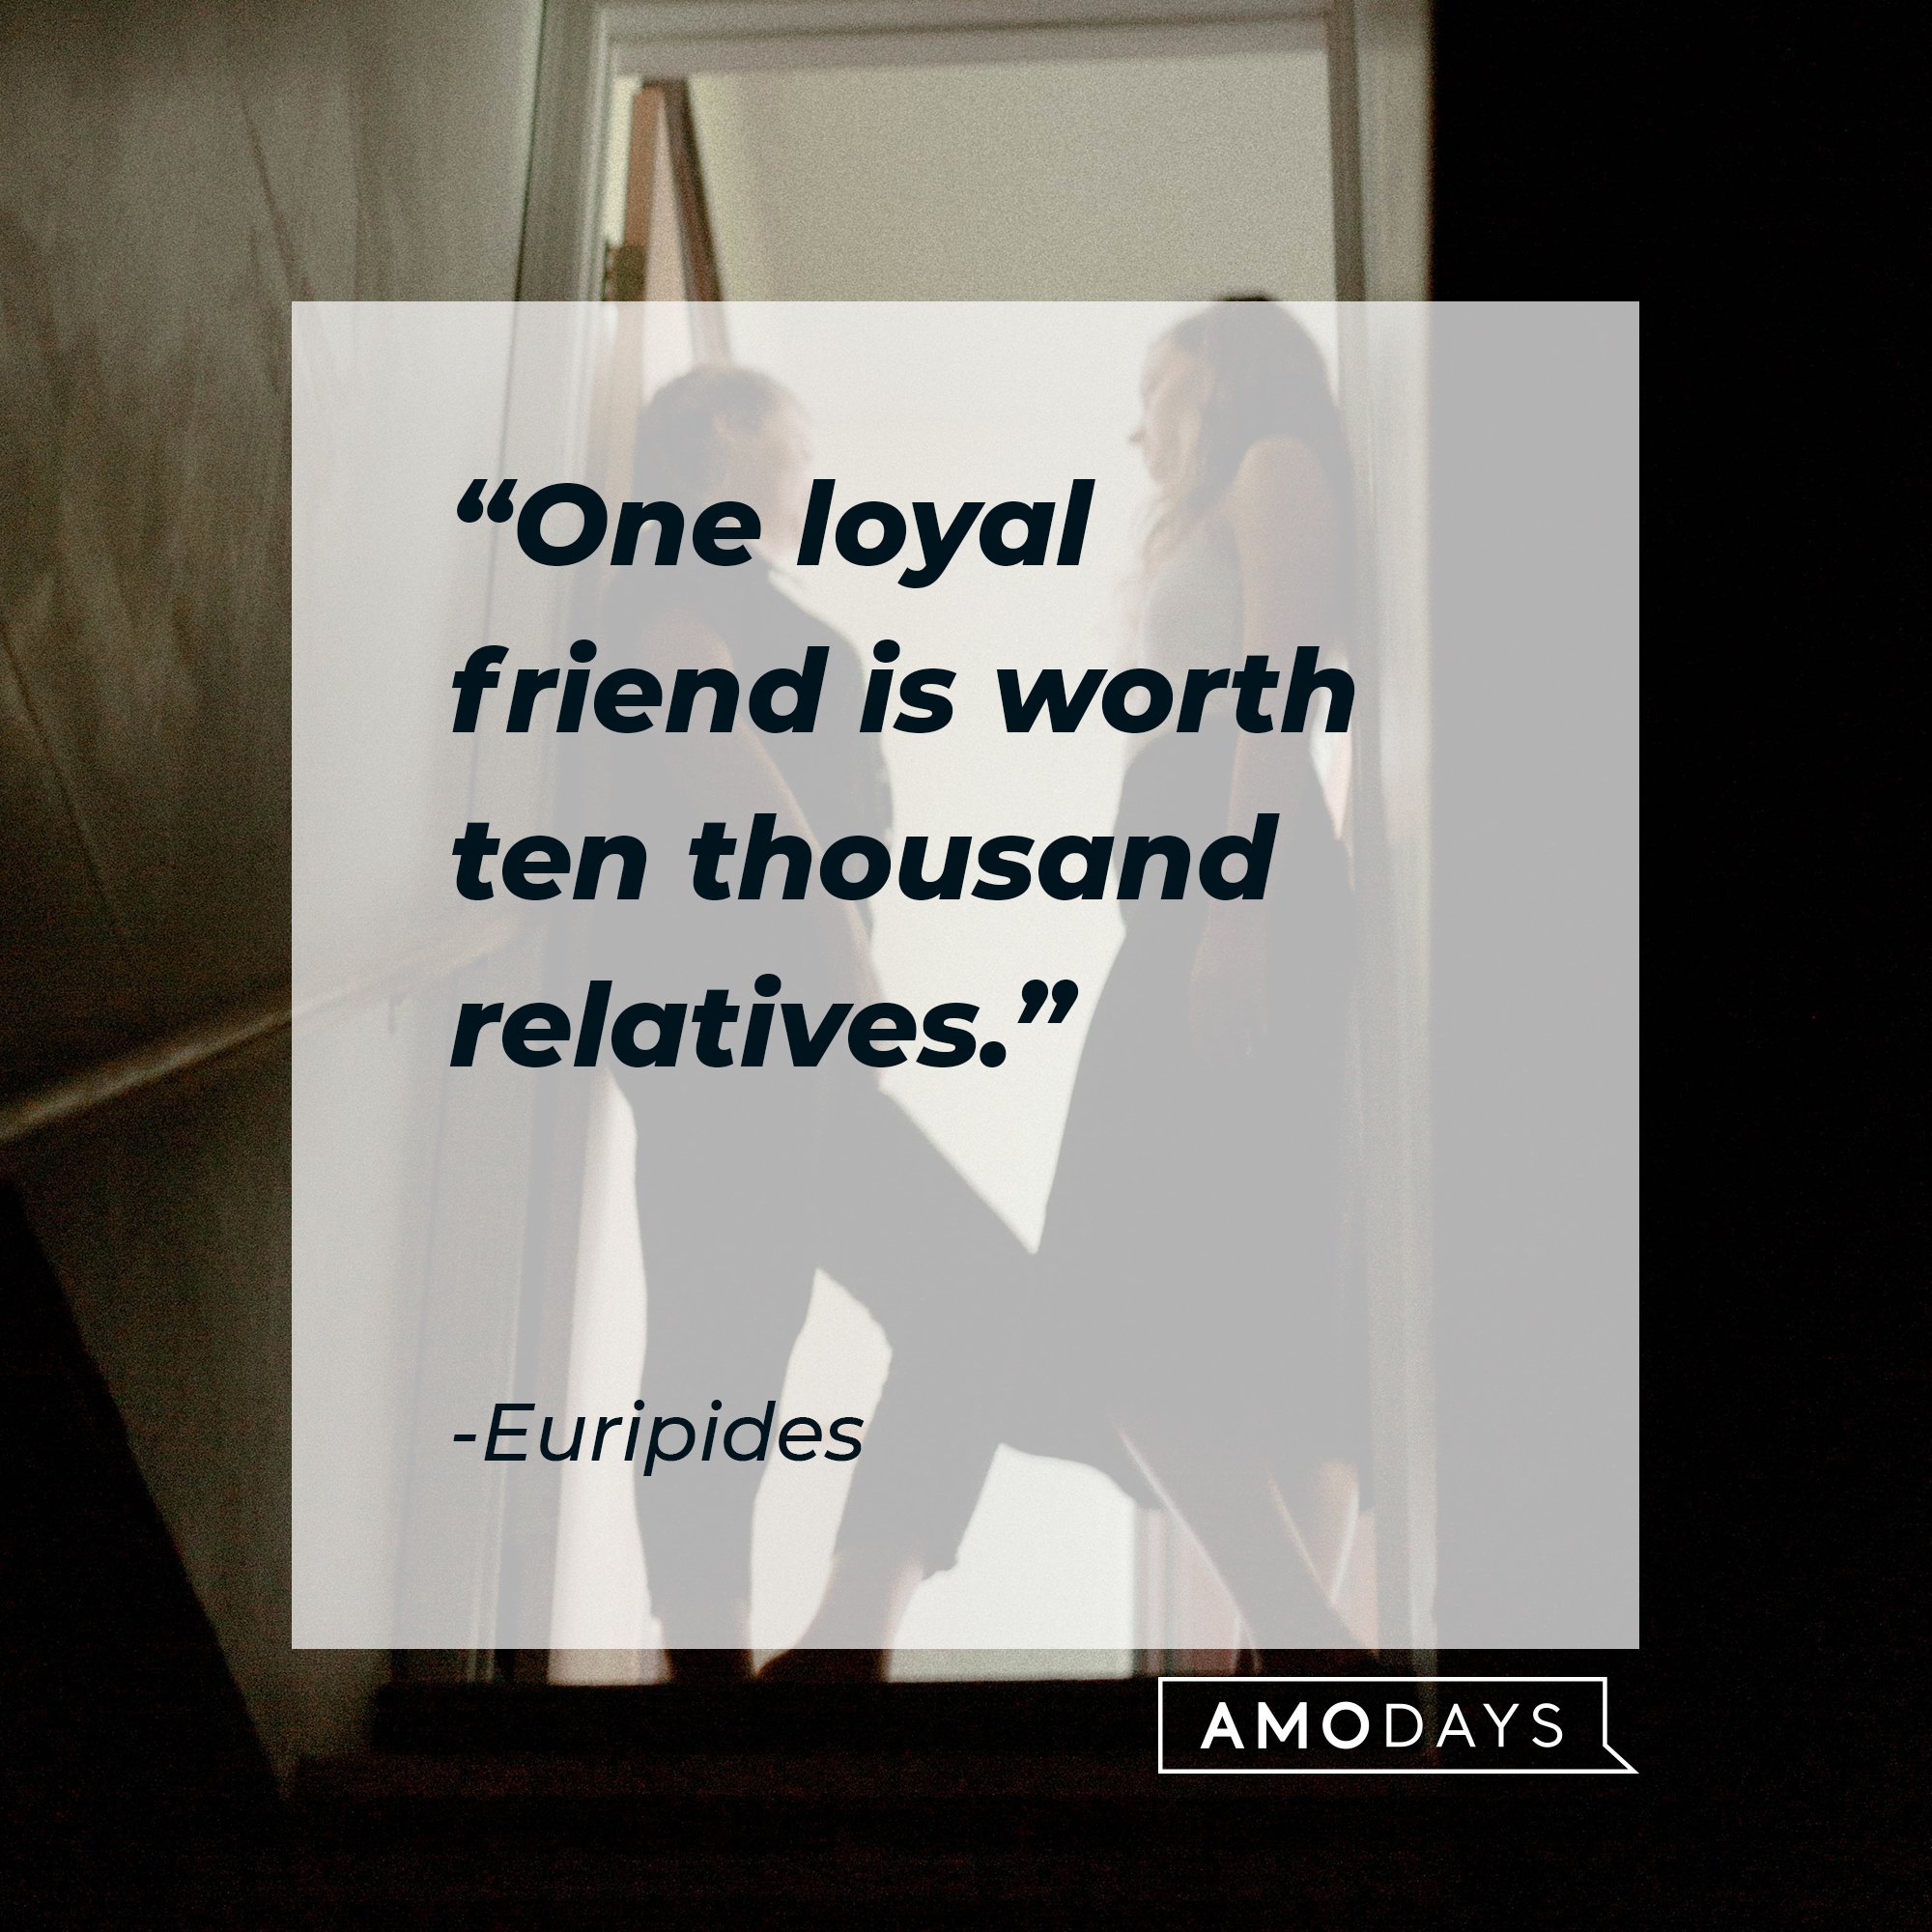 Euripides’s quote: "One loyal friend is worth ten thousand relatives."  | Image: AmoDays